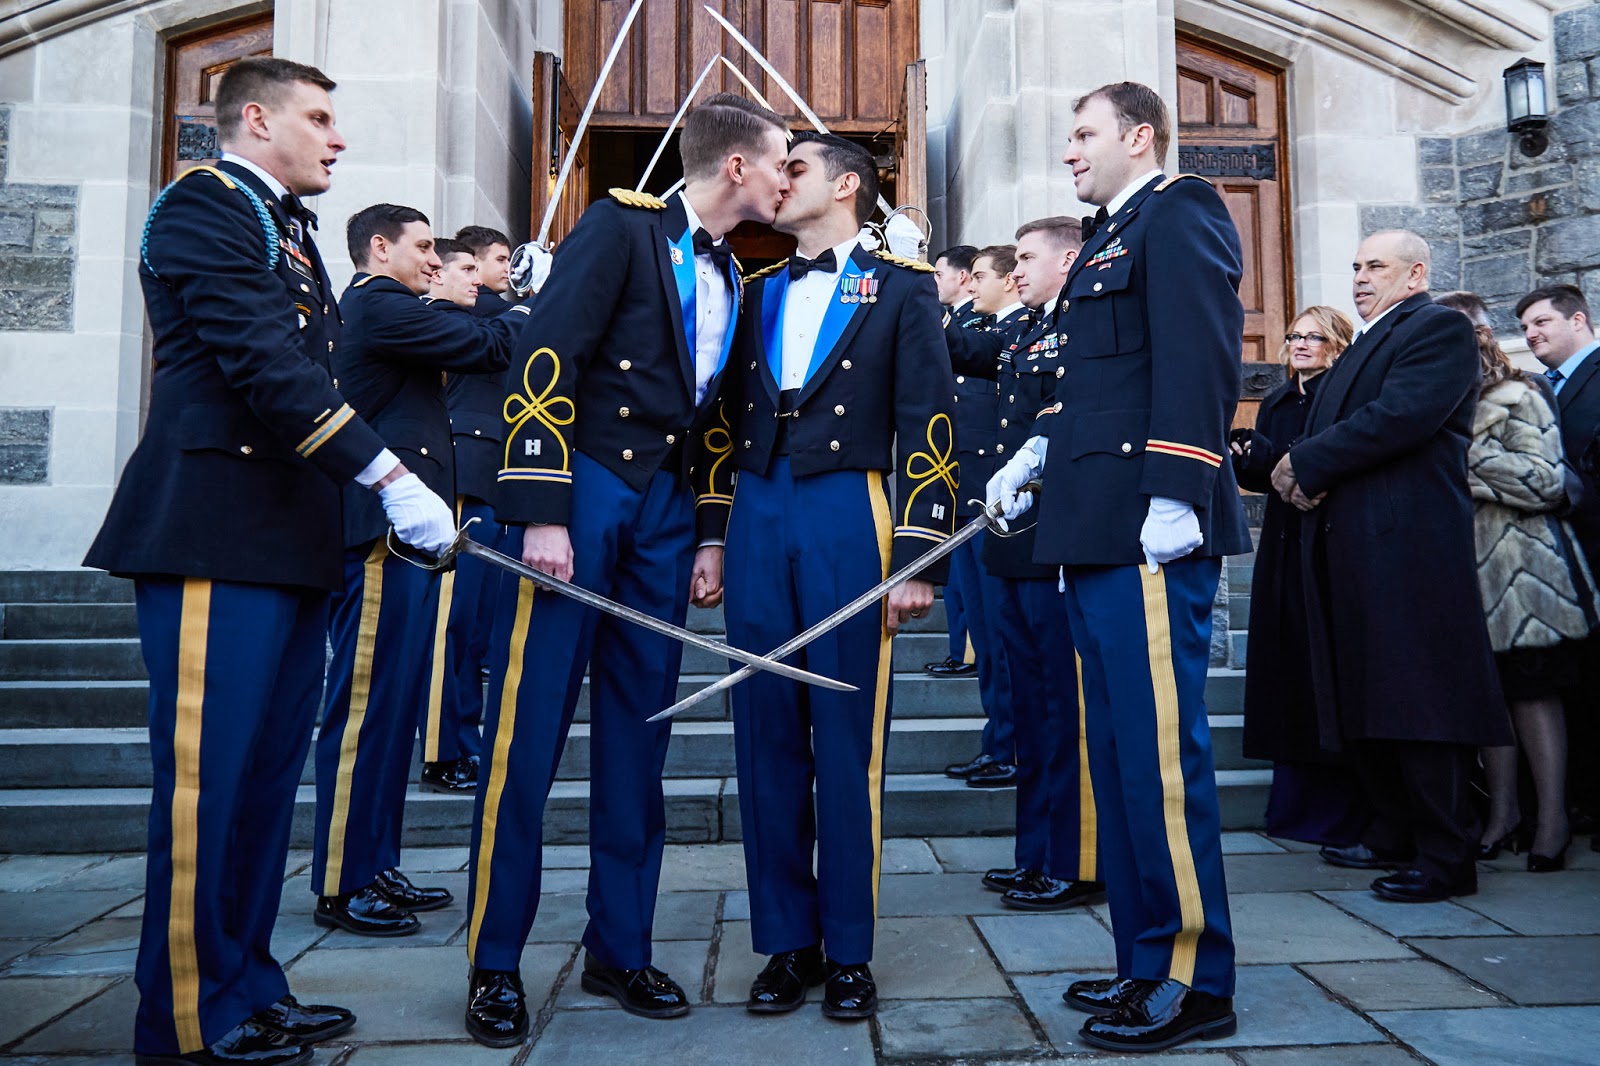 Homosexuality and the military